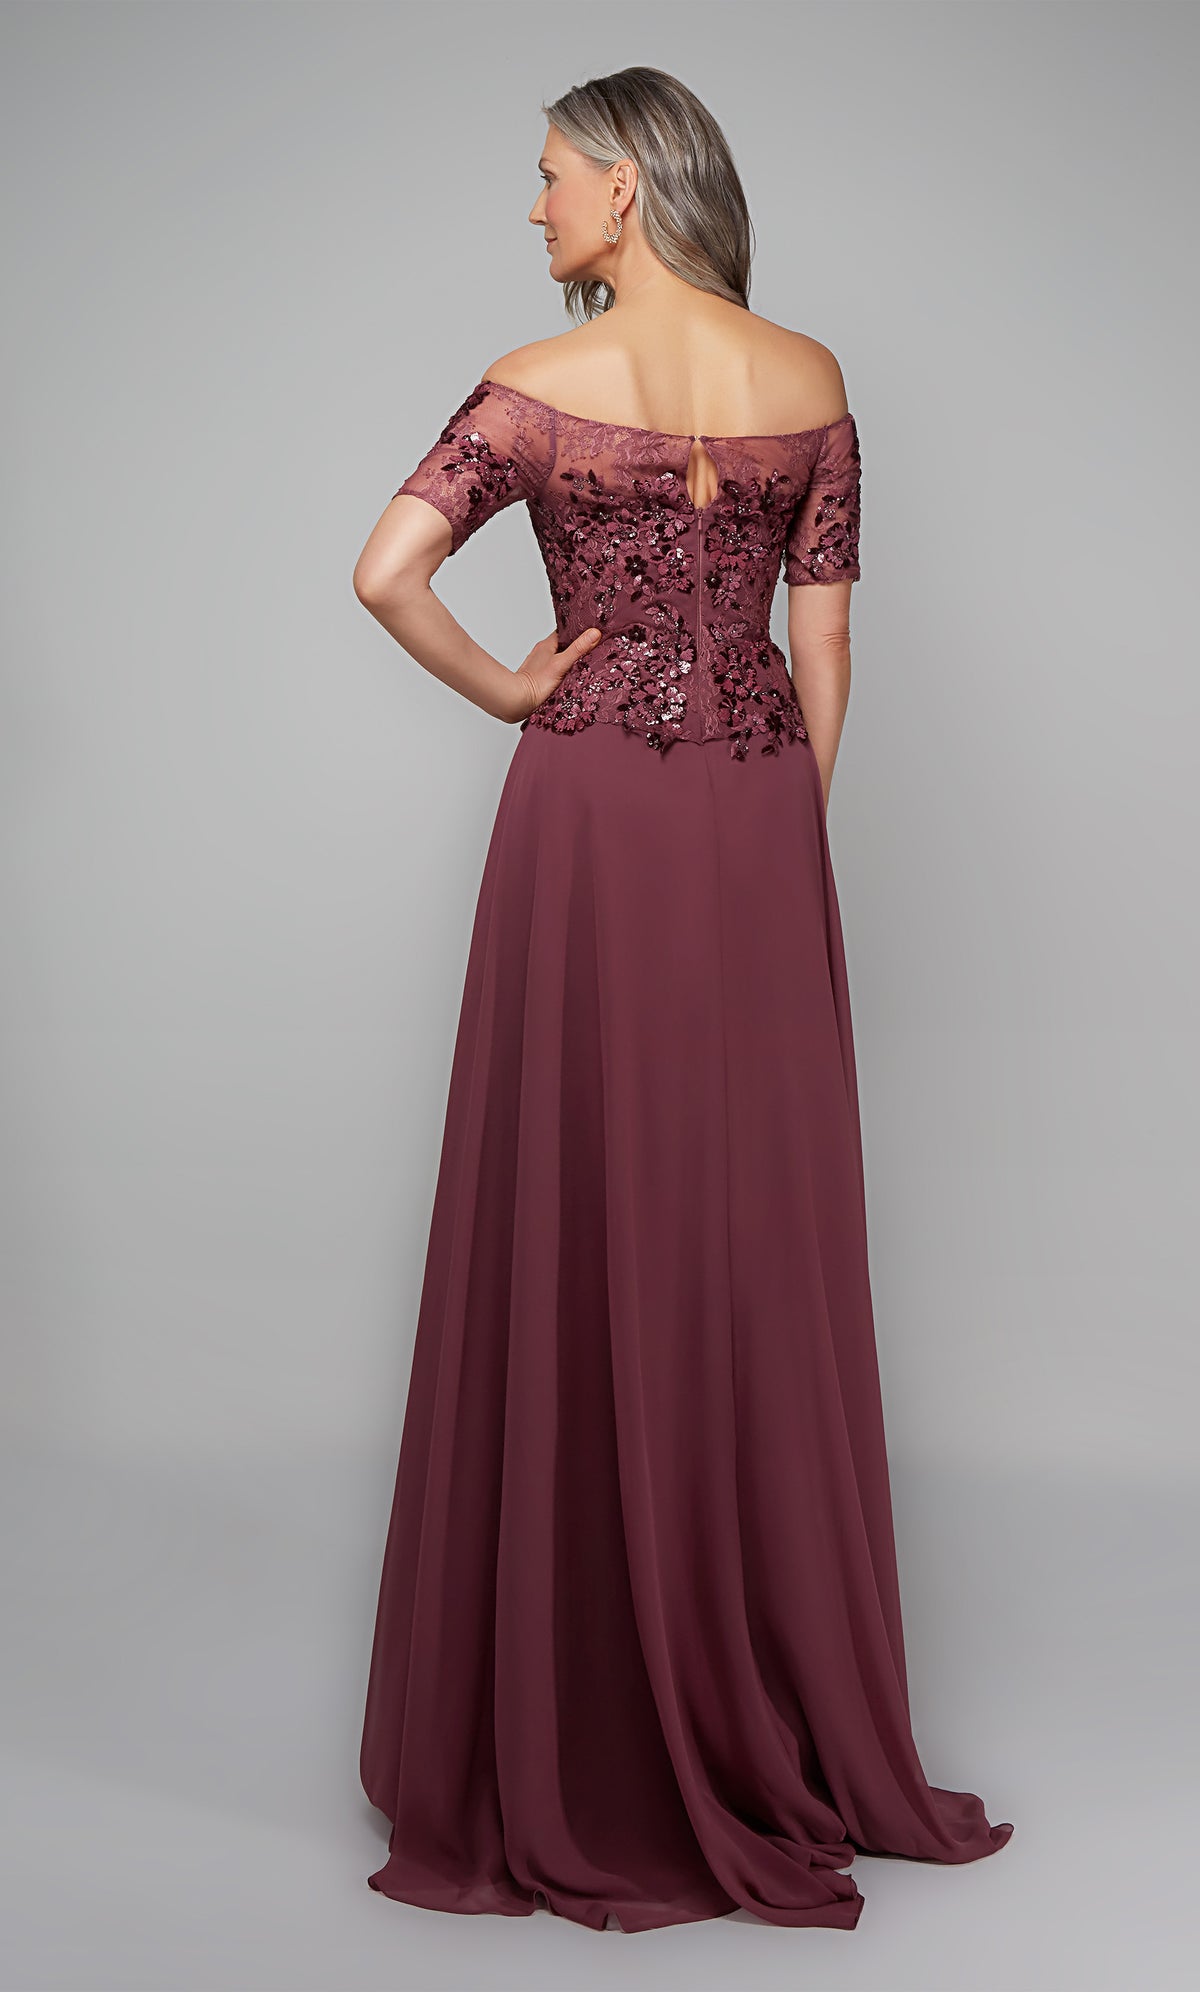 Off the shoulder chiffon formal dress with floral appliques and a train in purple.